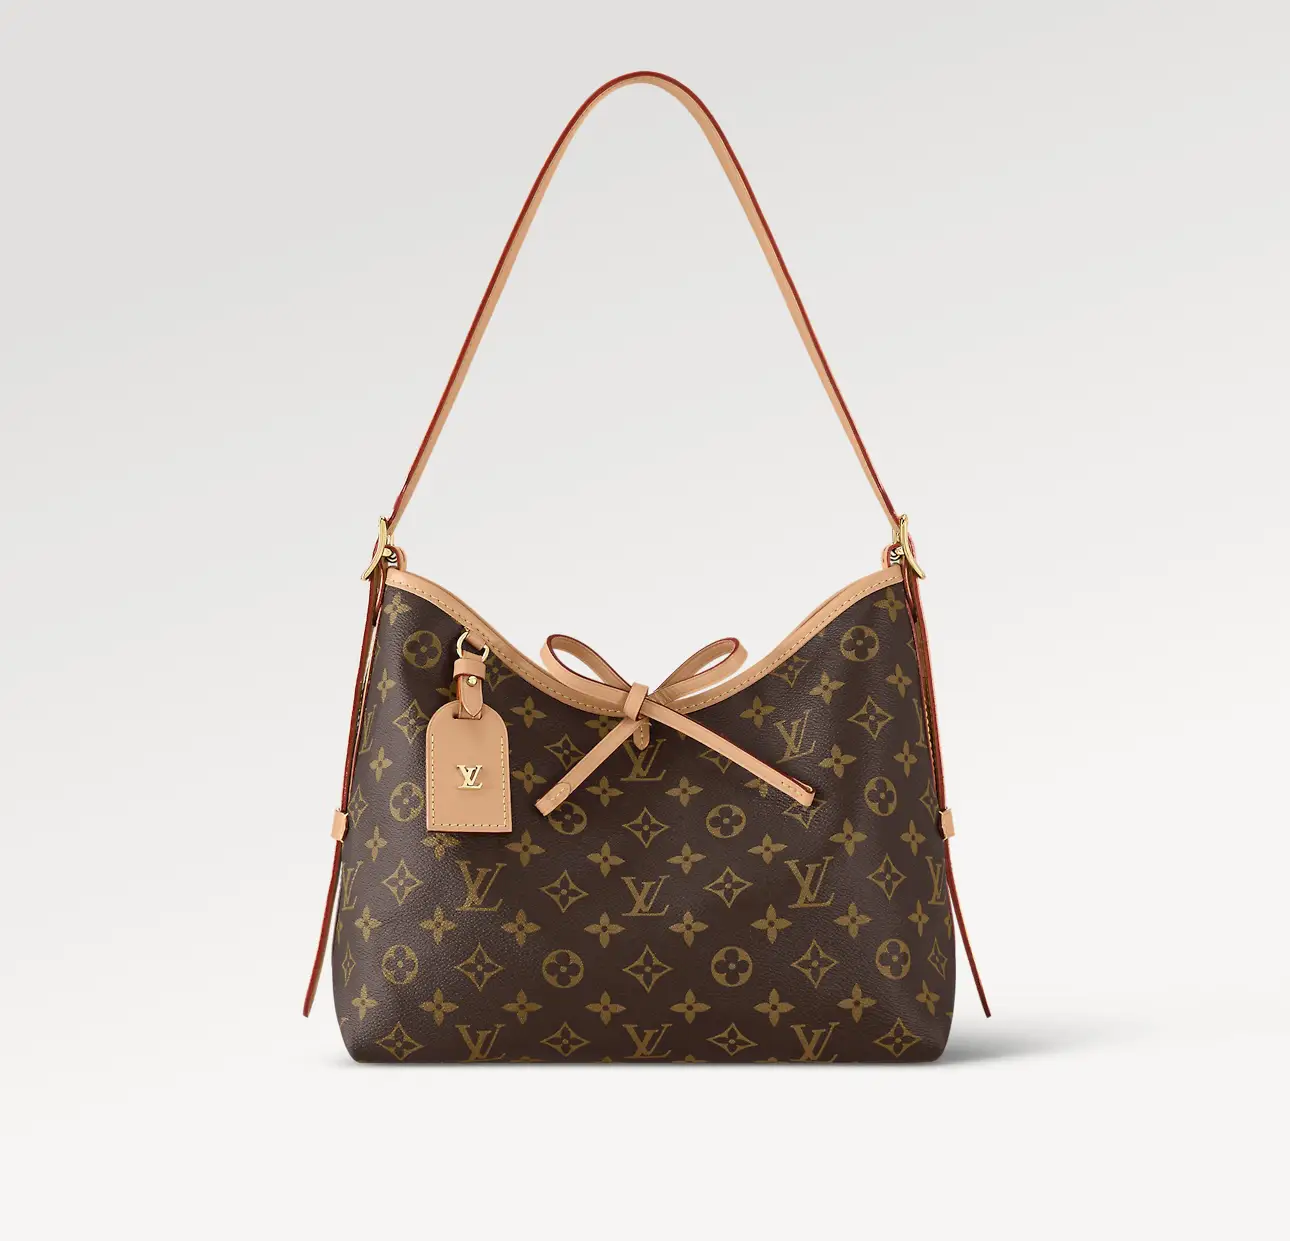 LOUIS VUITTON SIDE TRUNK BAGS ARE HERE! HONESTLY, SHOULD YOU BUY